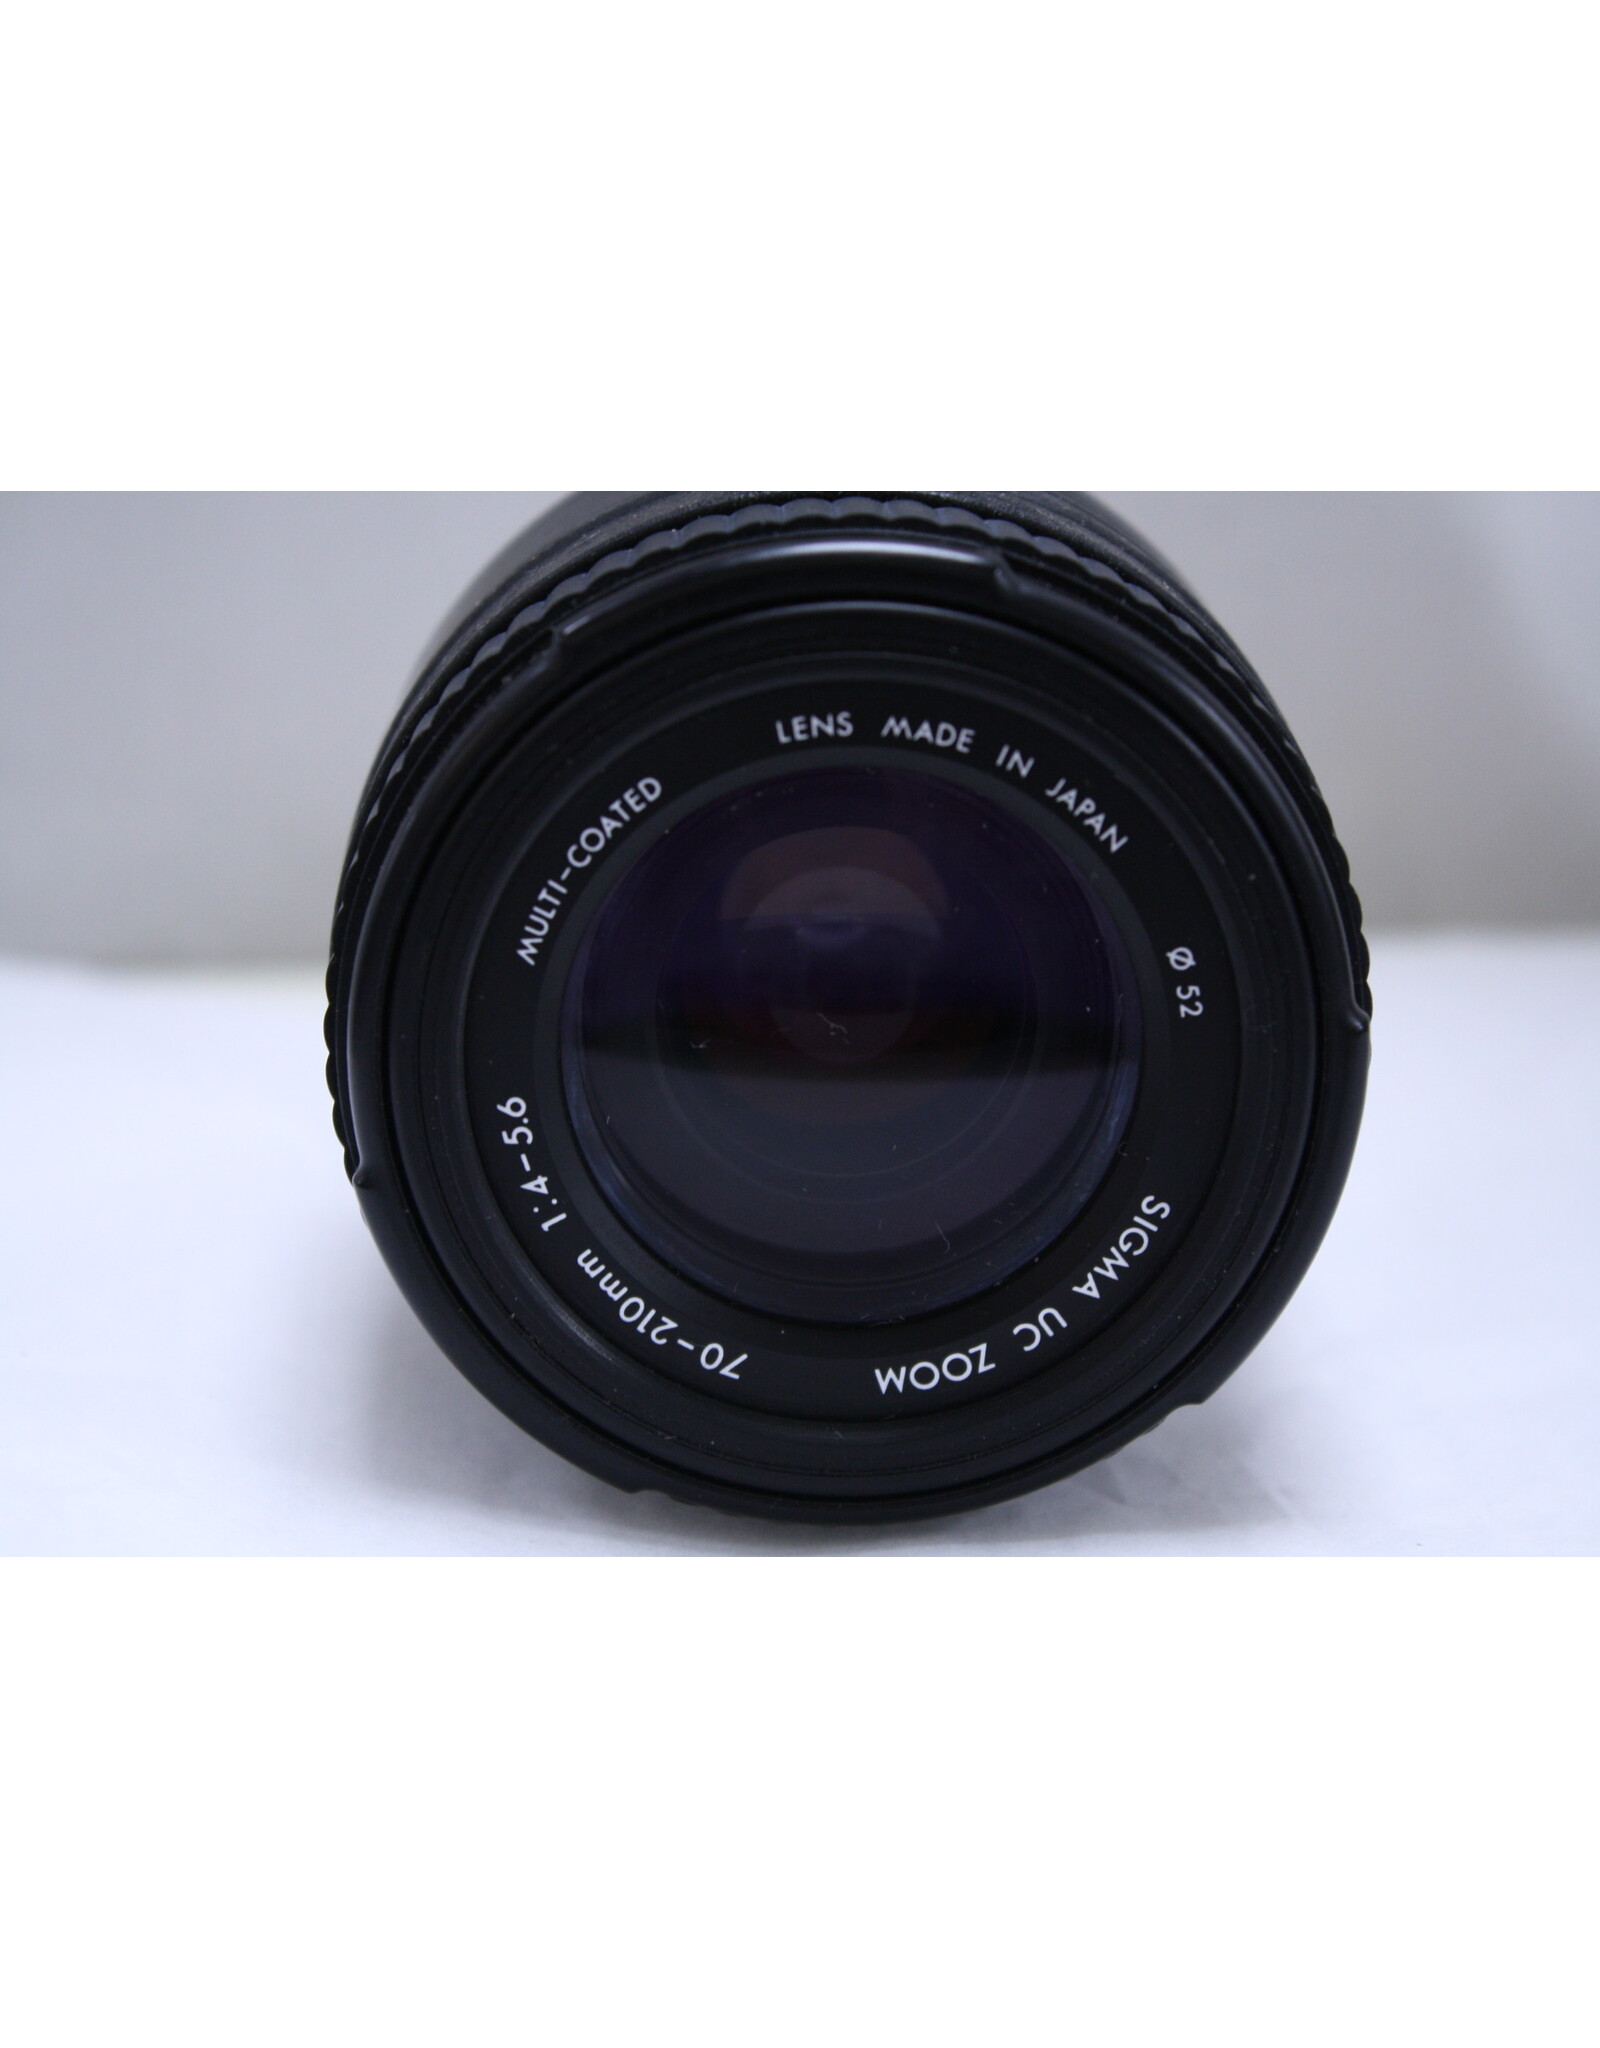 Sigma Sigma 70-210mm f4-5.6 for Pen K Mount (Pre-owned)